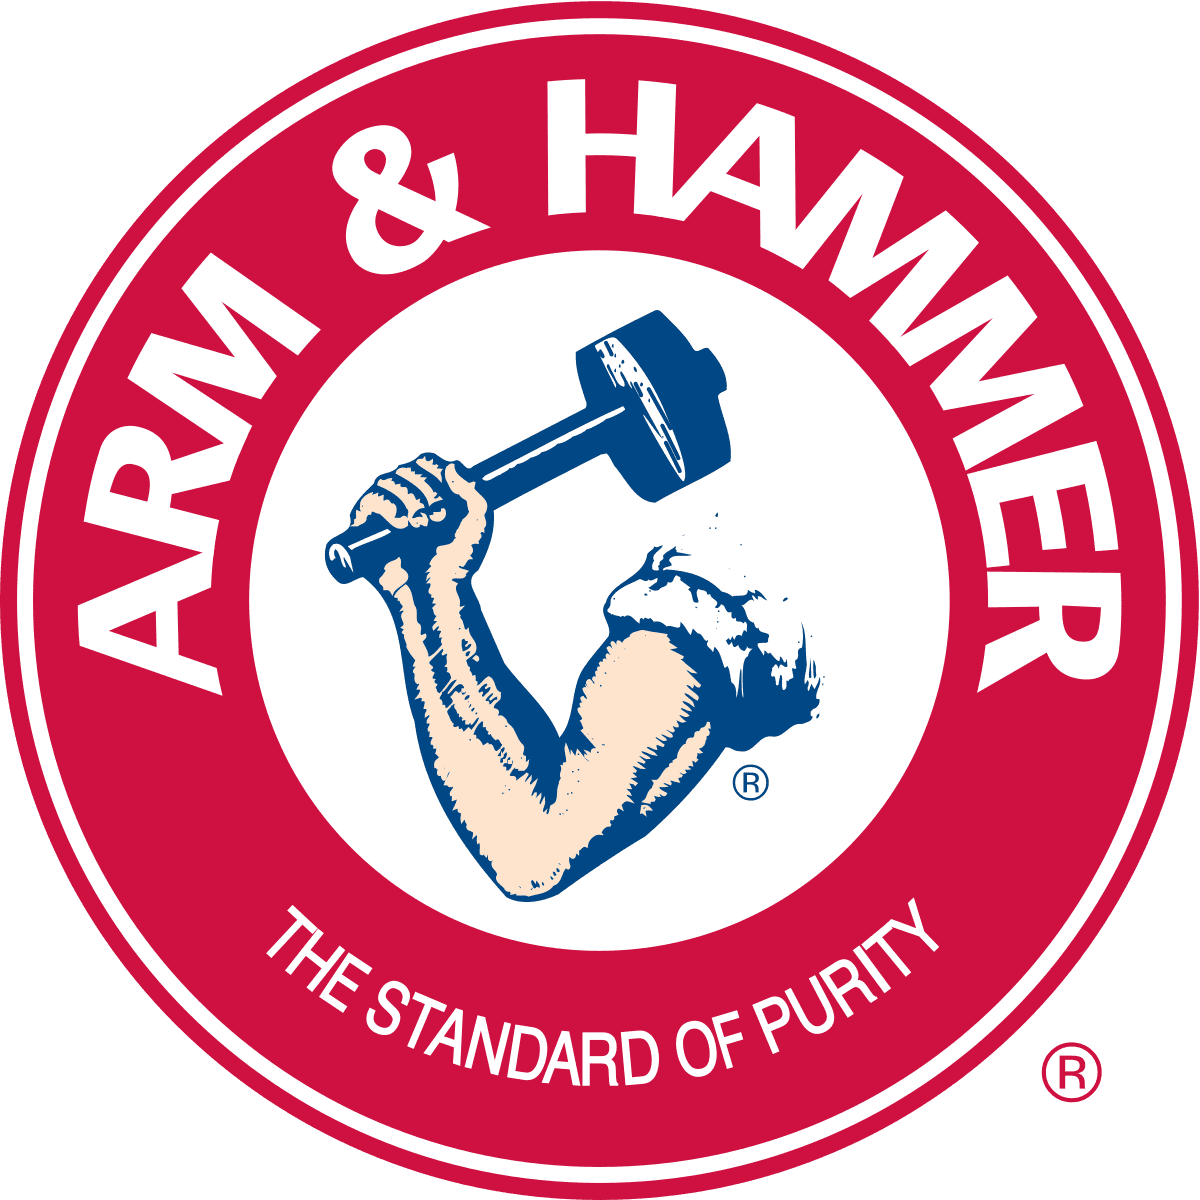 A red and white logo of arm & hammer.